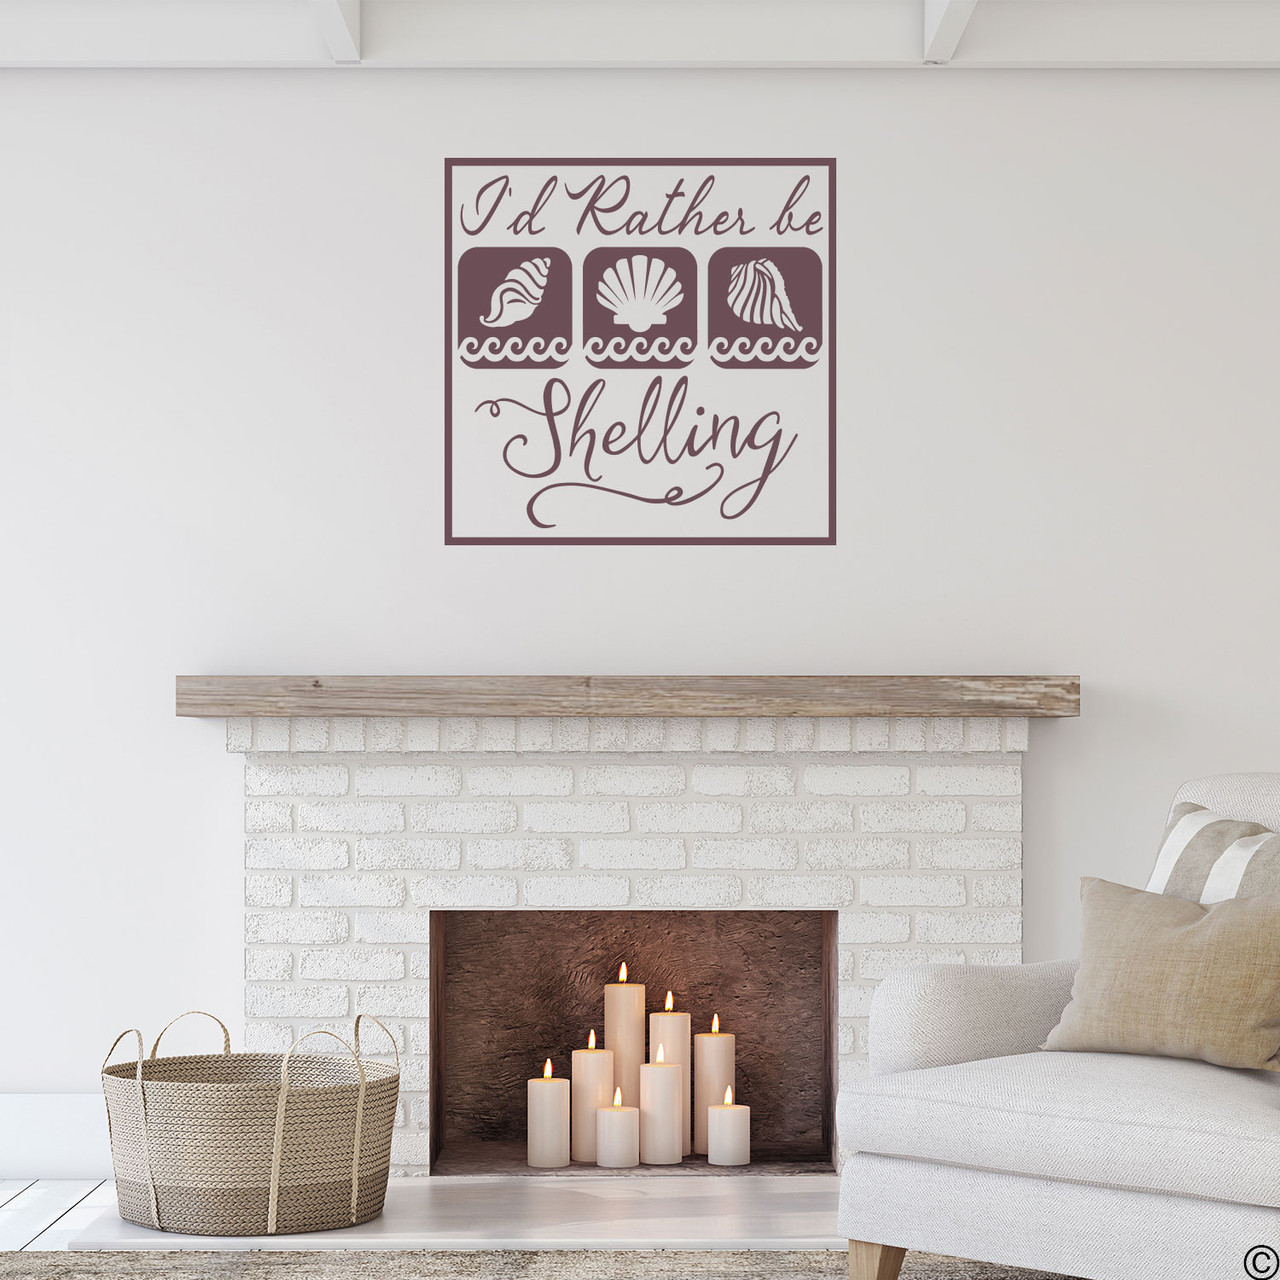 "I'd Rather Be Shelling," wall decal quote with seashell images. Shown here in limited edition eggplant color.